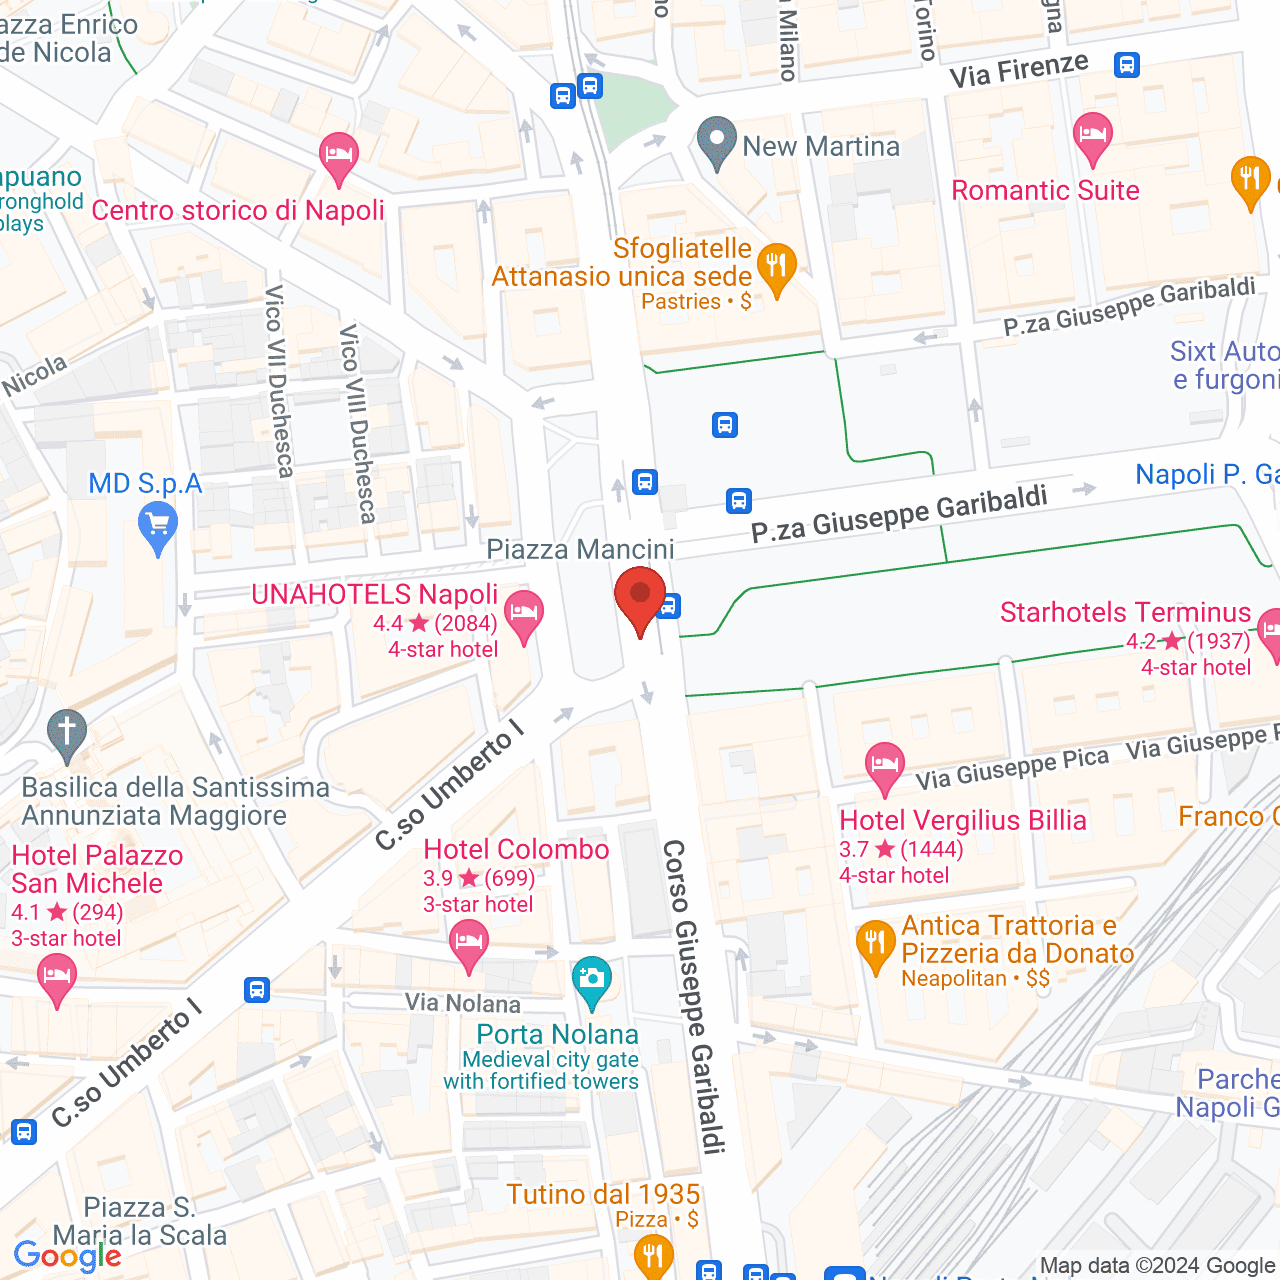 https://maps.googleapis.com/maps/api/staticmap?zoom=10&maptype=hybrid&scale=4&center=40.8517983,14.26812&markers=color:red%7C%7C40.8517983,14.26812&size=1000x1000&key=AIzaSyAQg6Liu52-a7wn17F9B-5c4QmJ9kTO3Mo